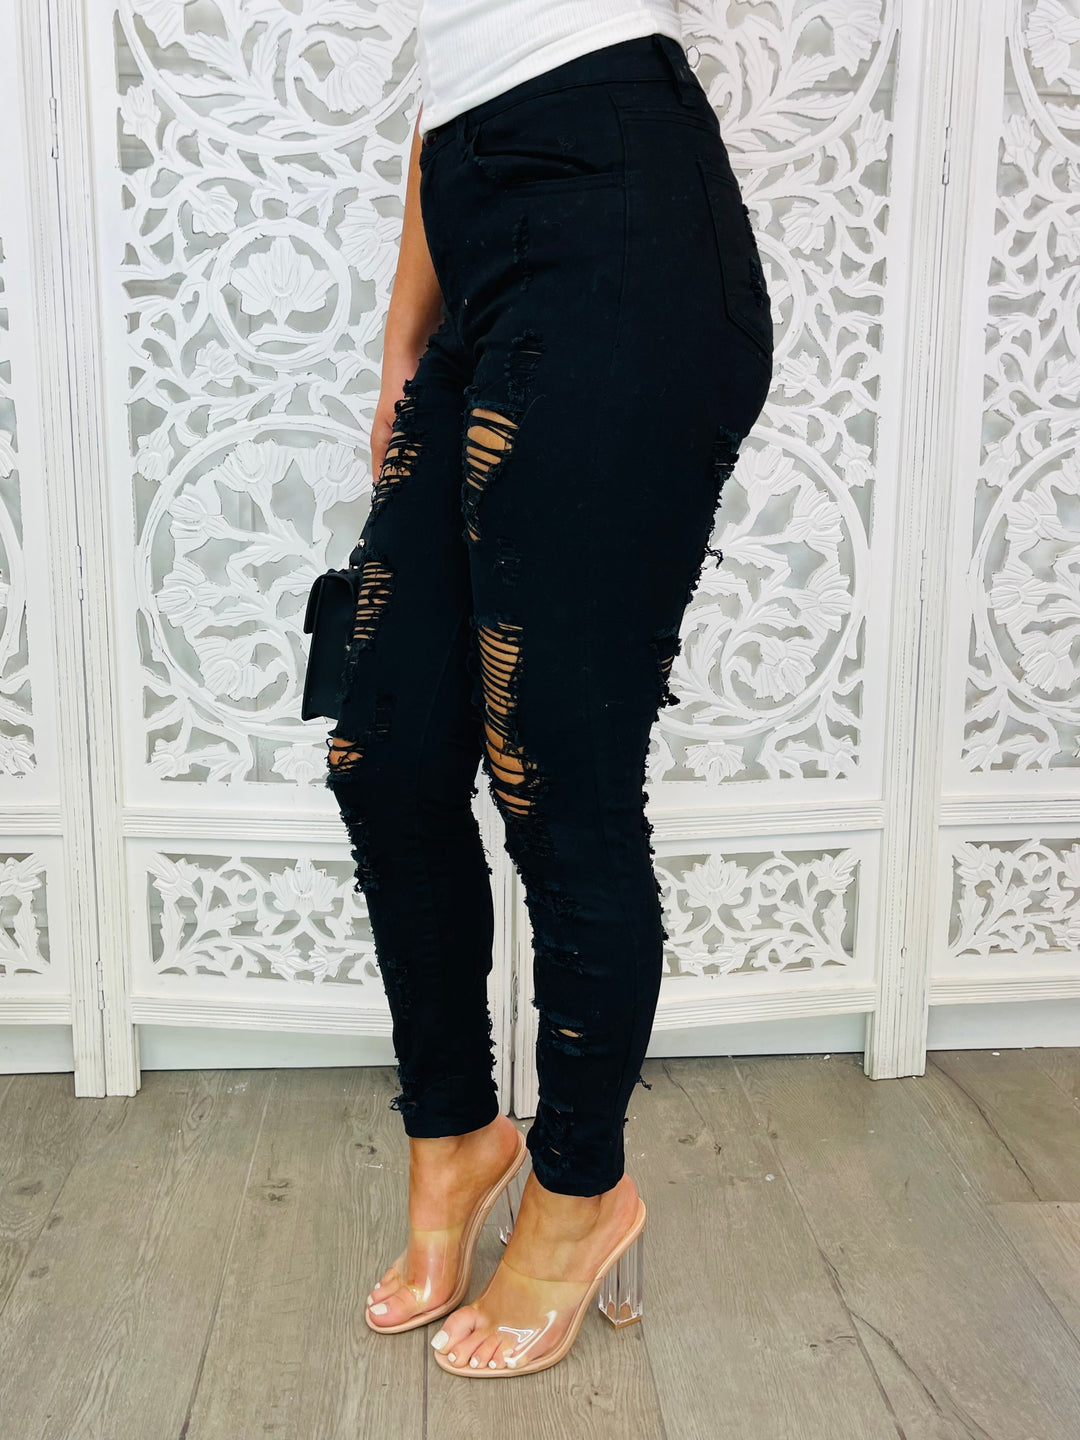 MIDNIGHT SKY Black Stretchy Ripped Distressed Jeans-Jeans-Malandra Boutique-Malandra Boutique, Women's Fashion Boutique Located in Las Vegas, NV